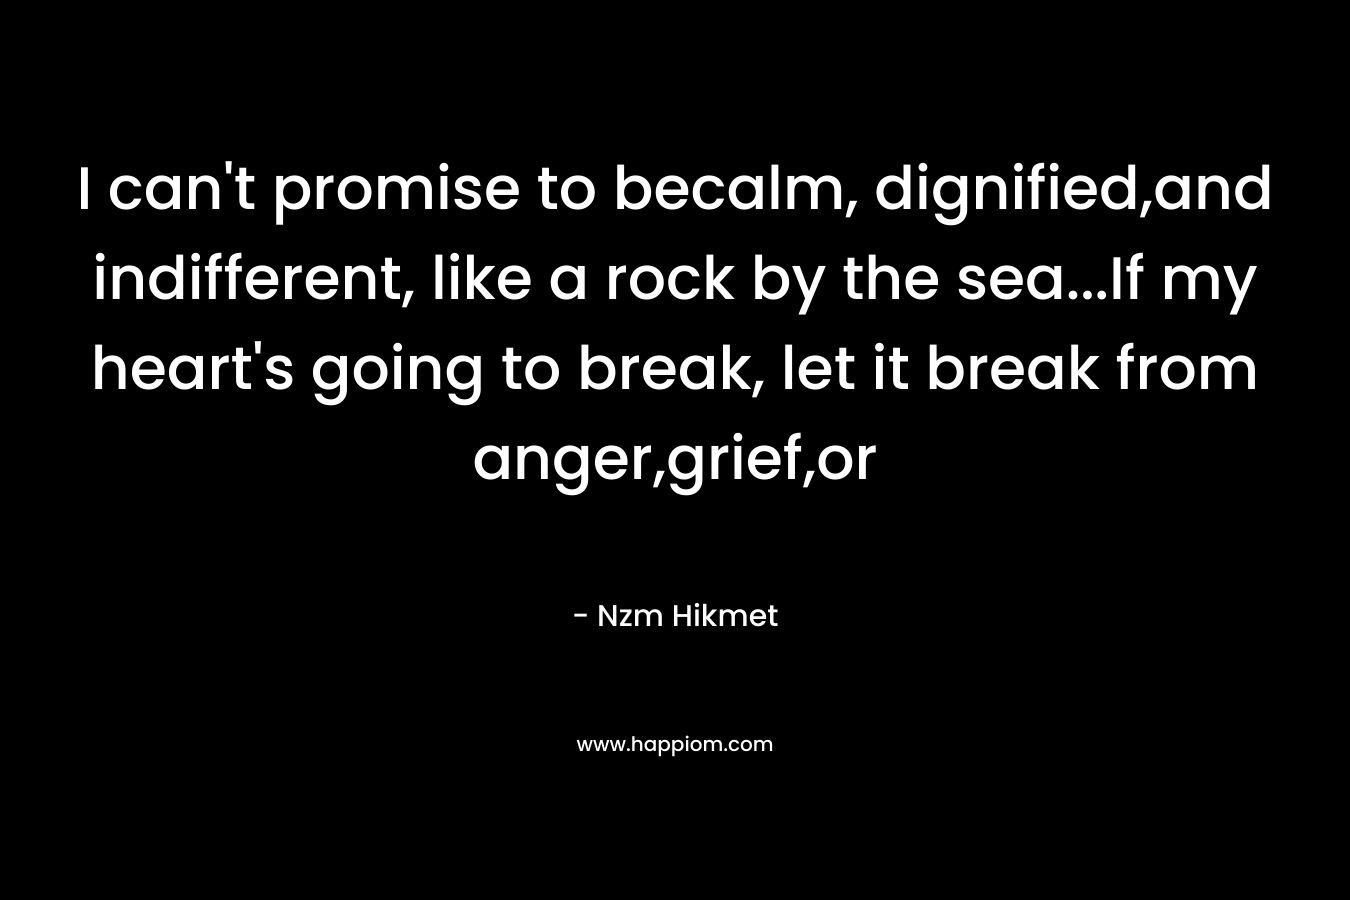 I can’t promise to becalm, dignified,and indifferent, like a rock by the sea…If my heart’s going to break, let it break from anger,grief,or – Nzm Hikmet